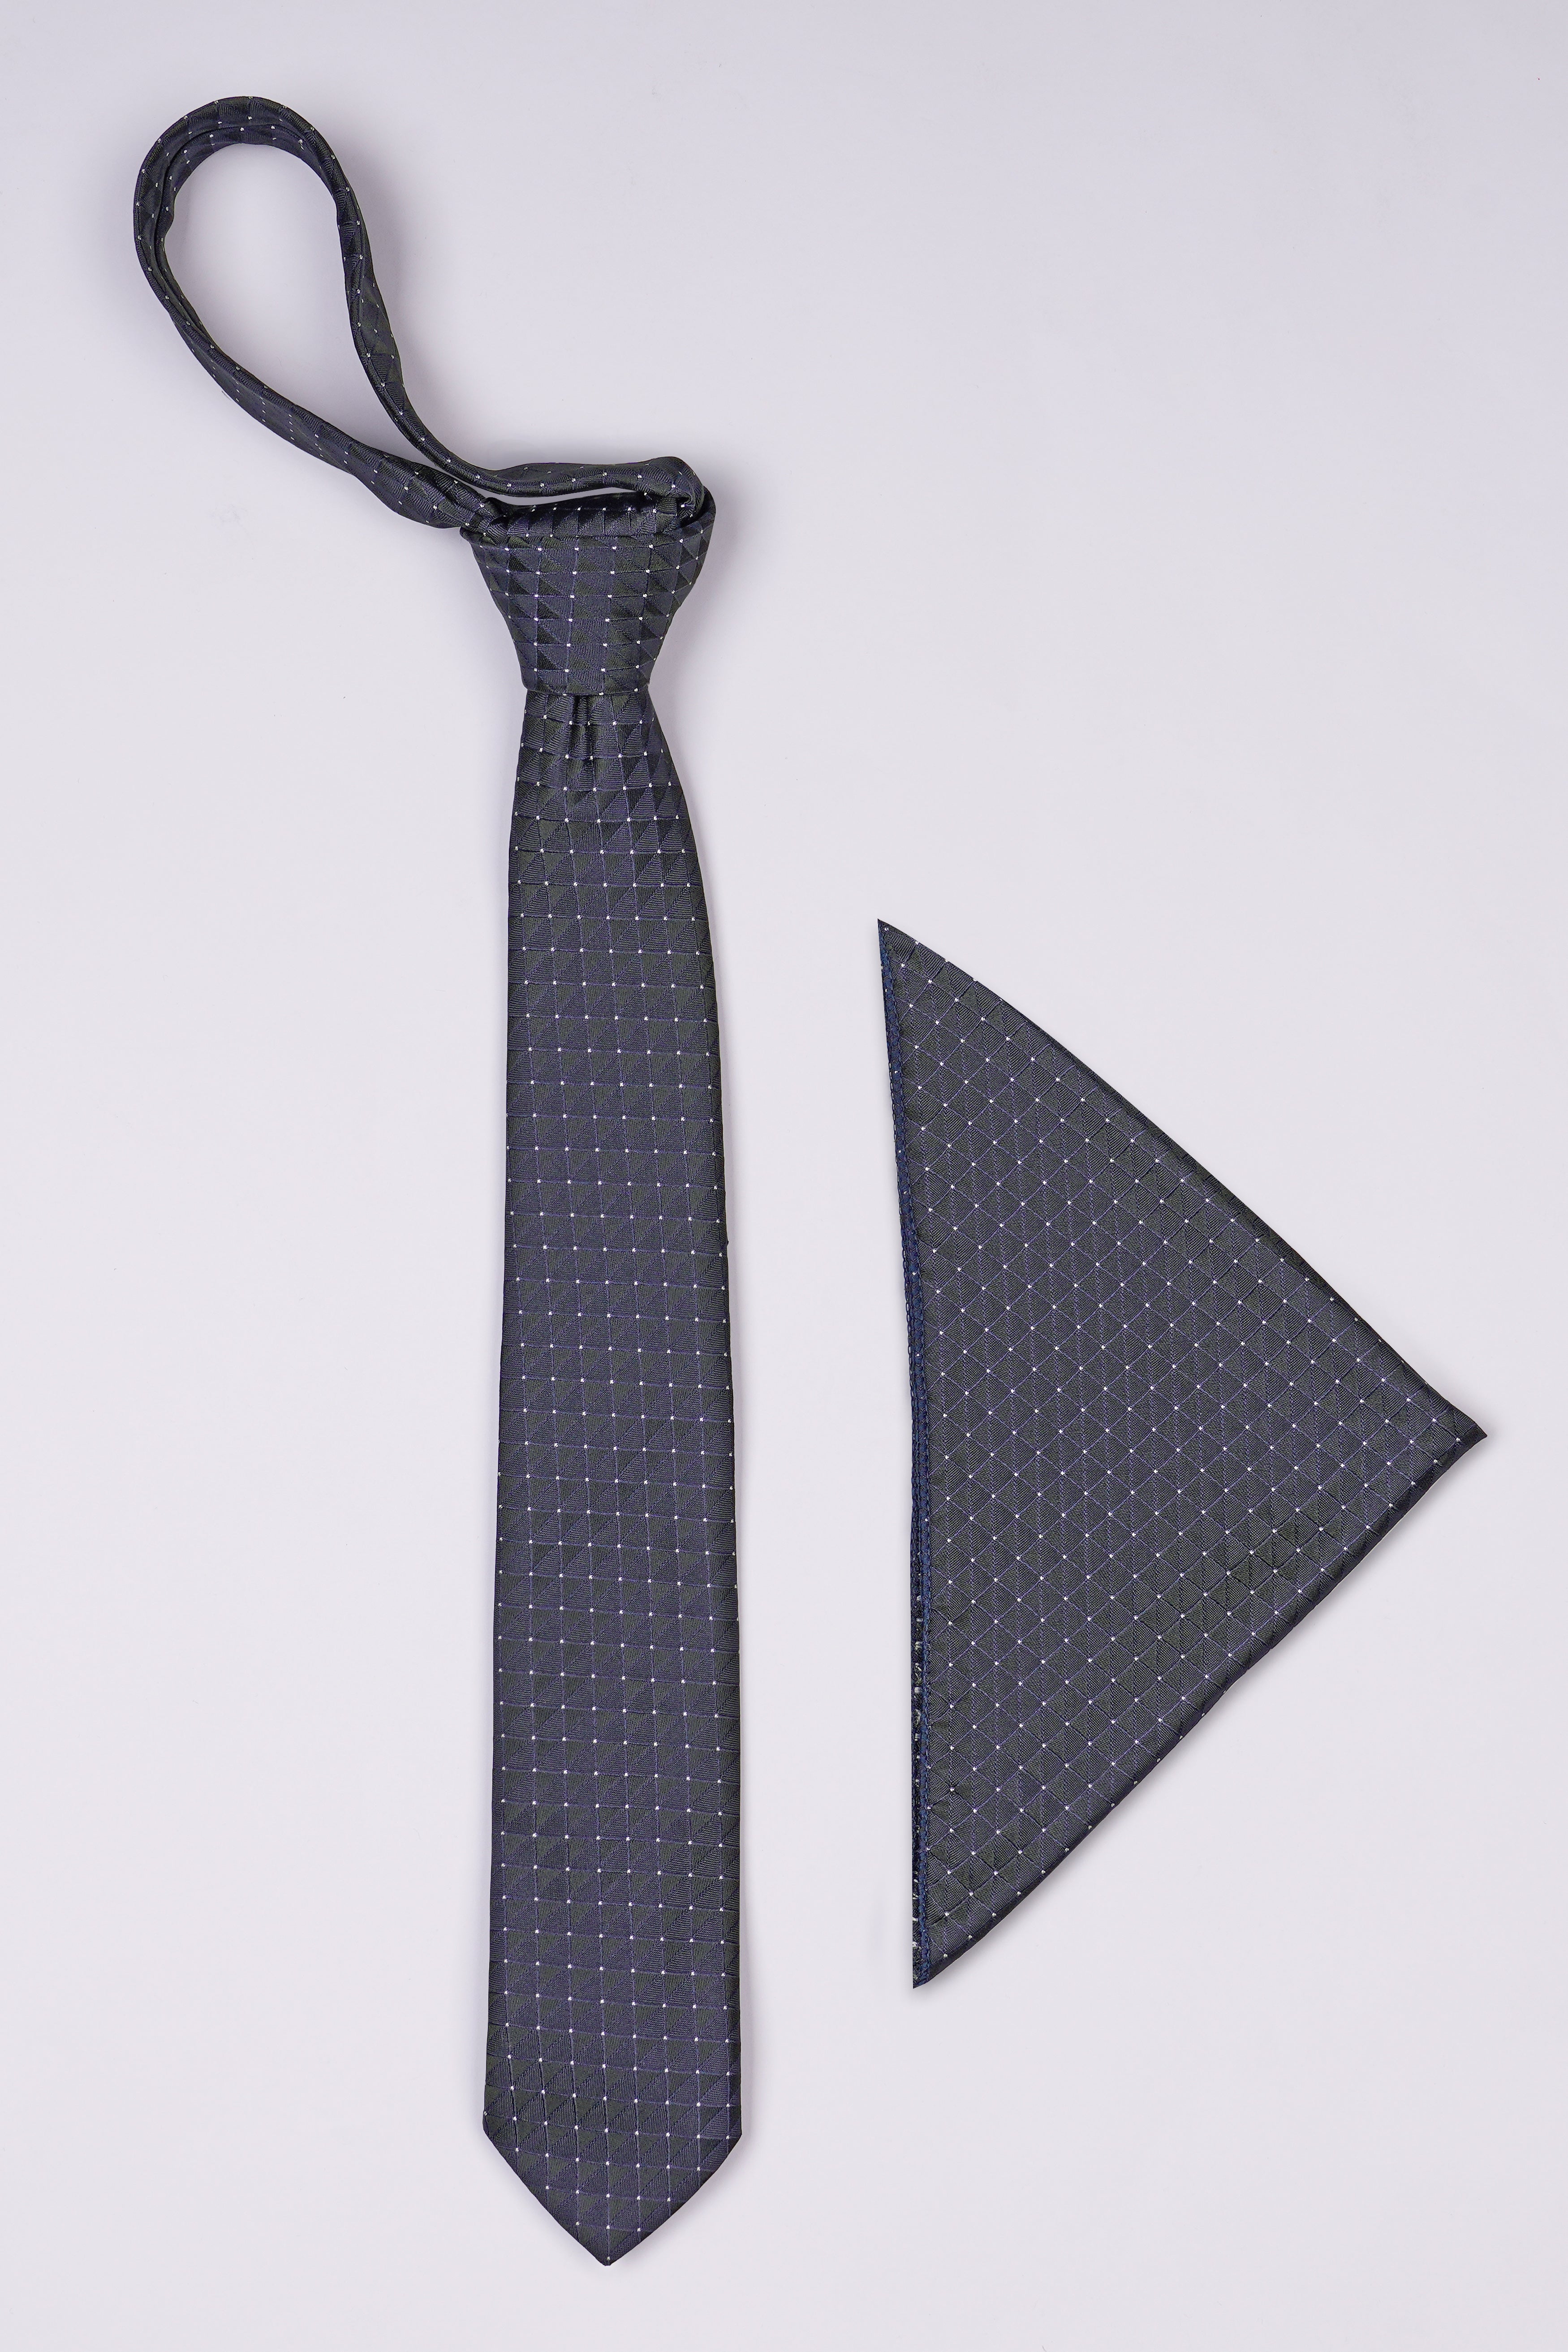 Mulled Wine Blue Checkered Jacquard Tie with Pocket Square TP070